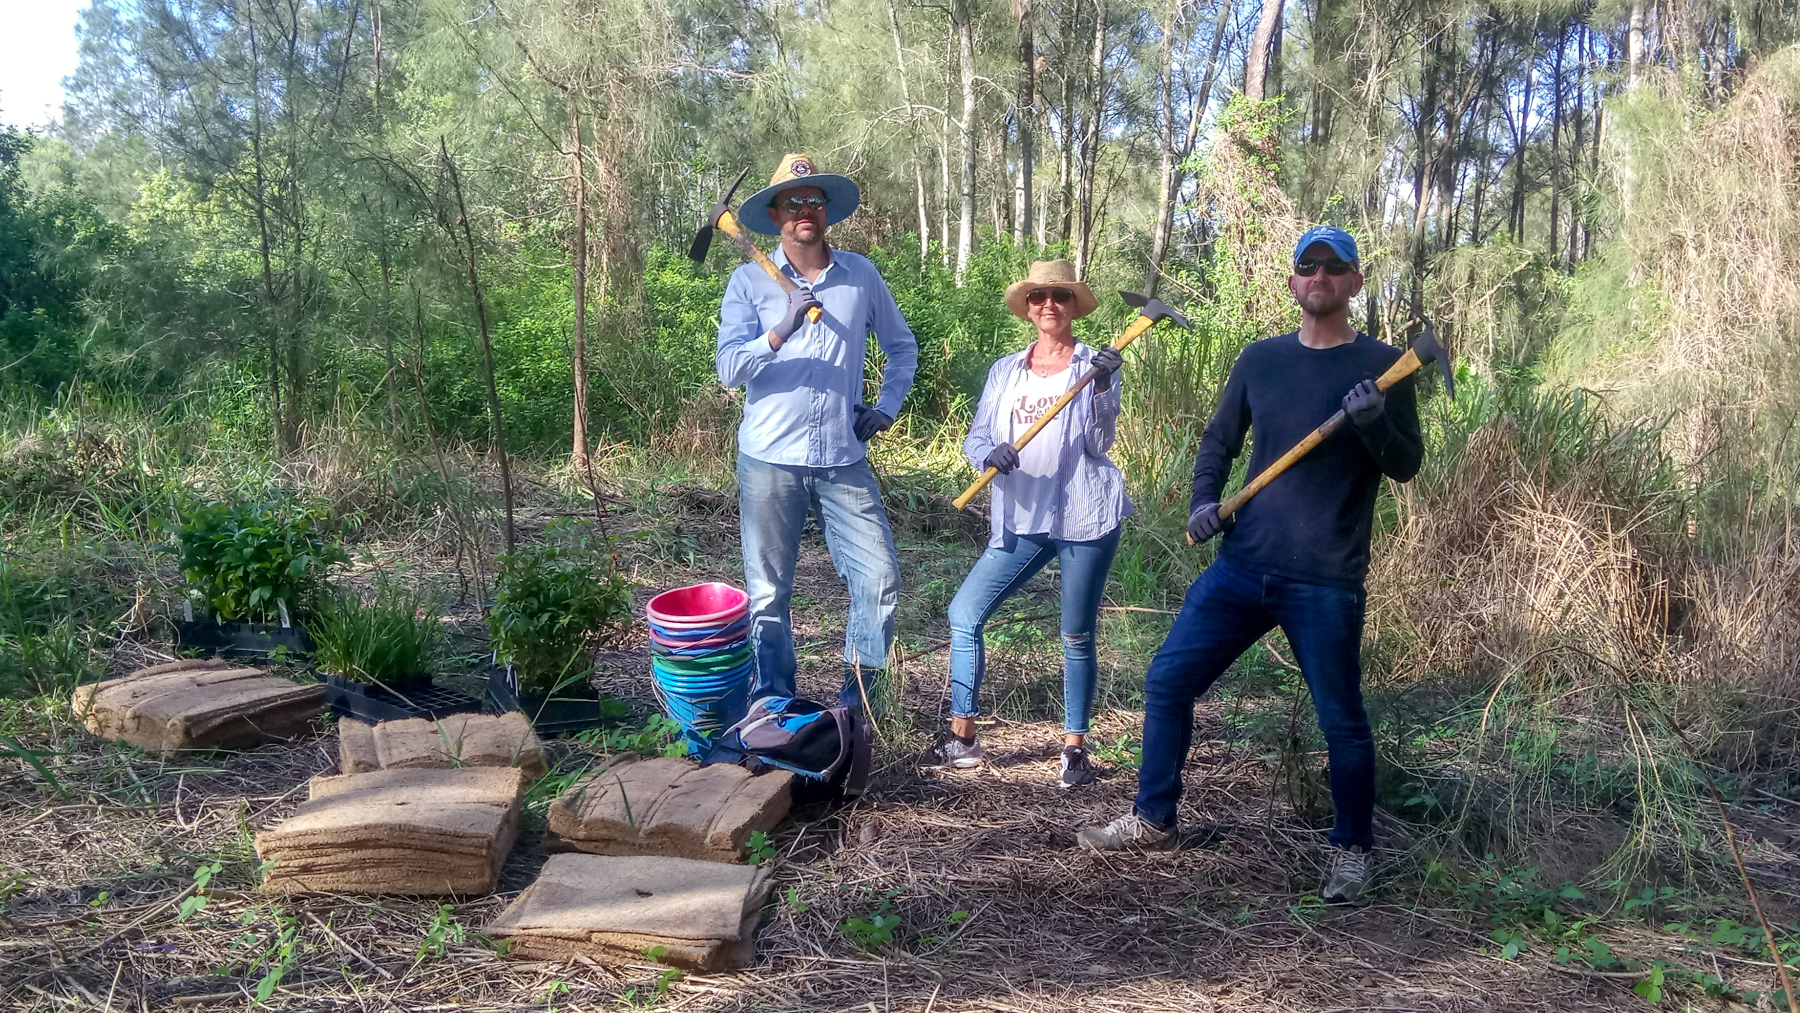 Ben, Sue and Michael wield mattocks in a cleared patch of bushland. There are piles of buckets, weed mats and seedlings on the ground next to them.